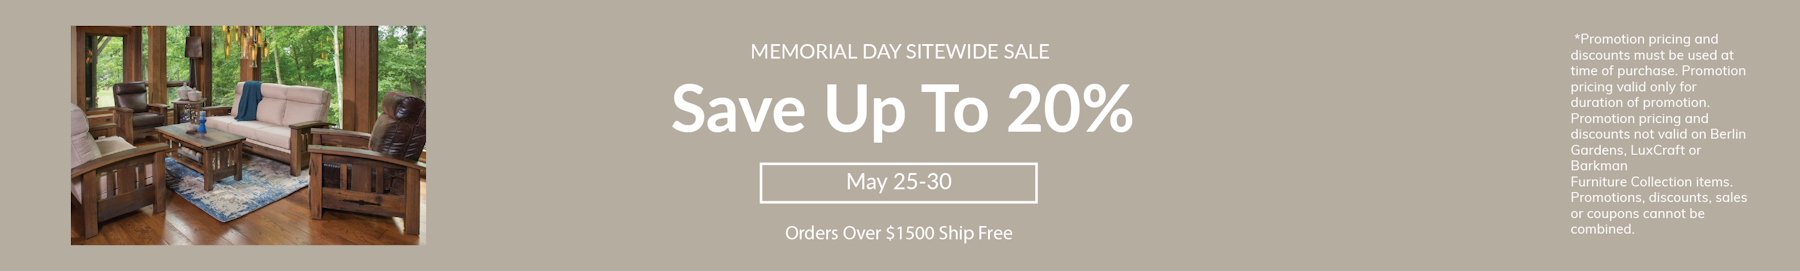 Memorial Day Sitewide Sale